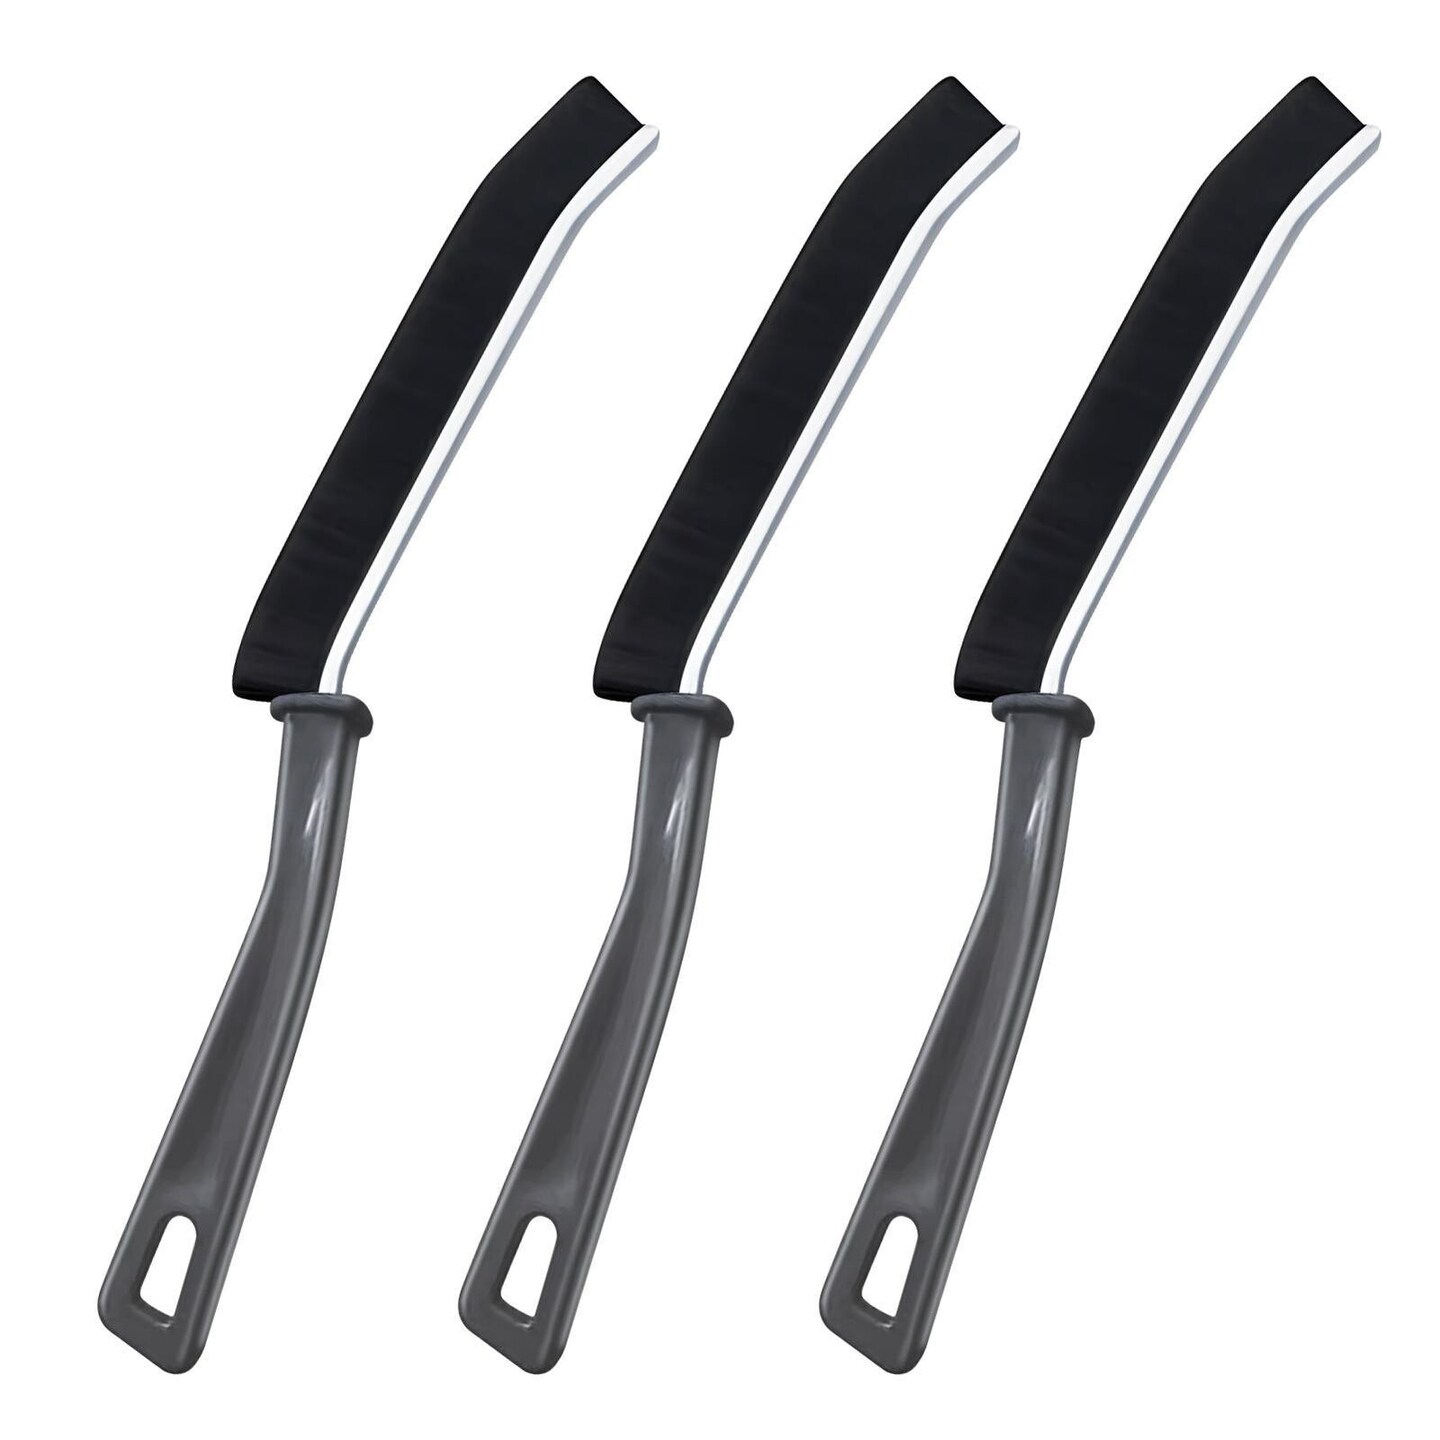 Window Groove Cleaning Brush, Hand-held Crevice Cleaner Tools, 3pcs 